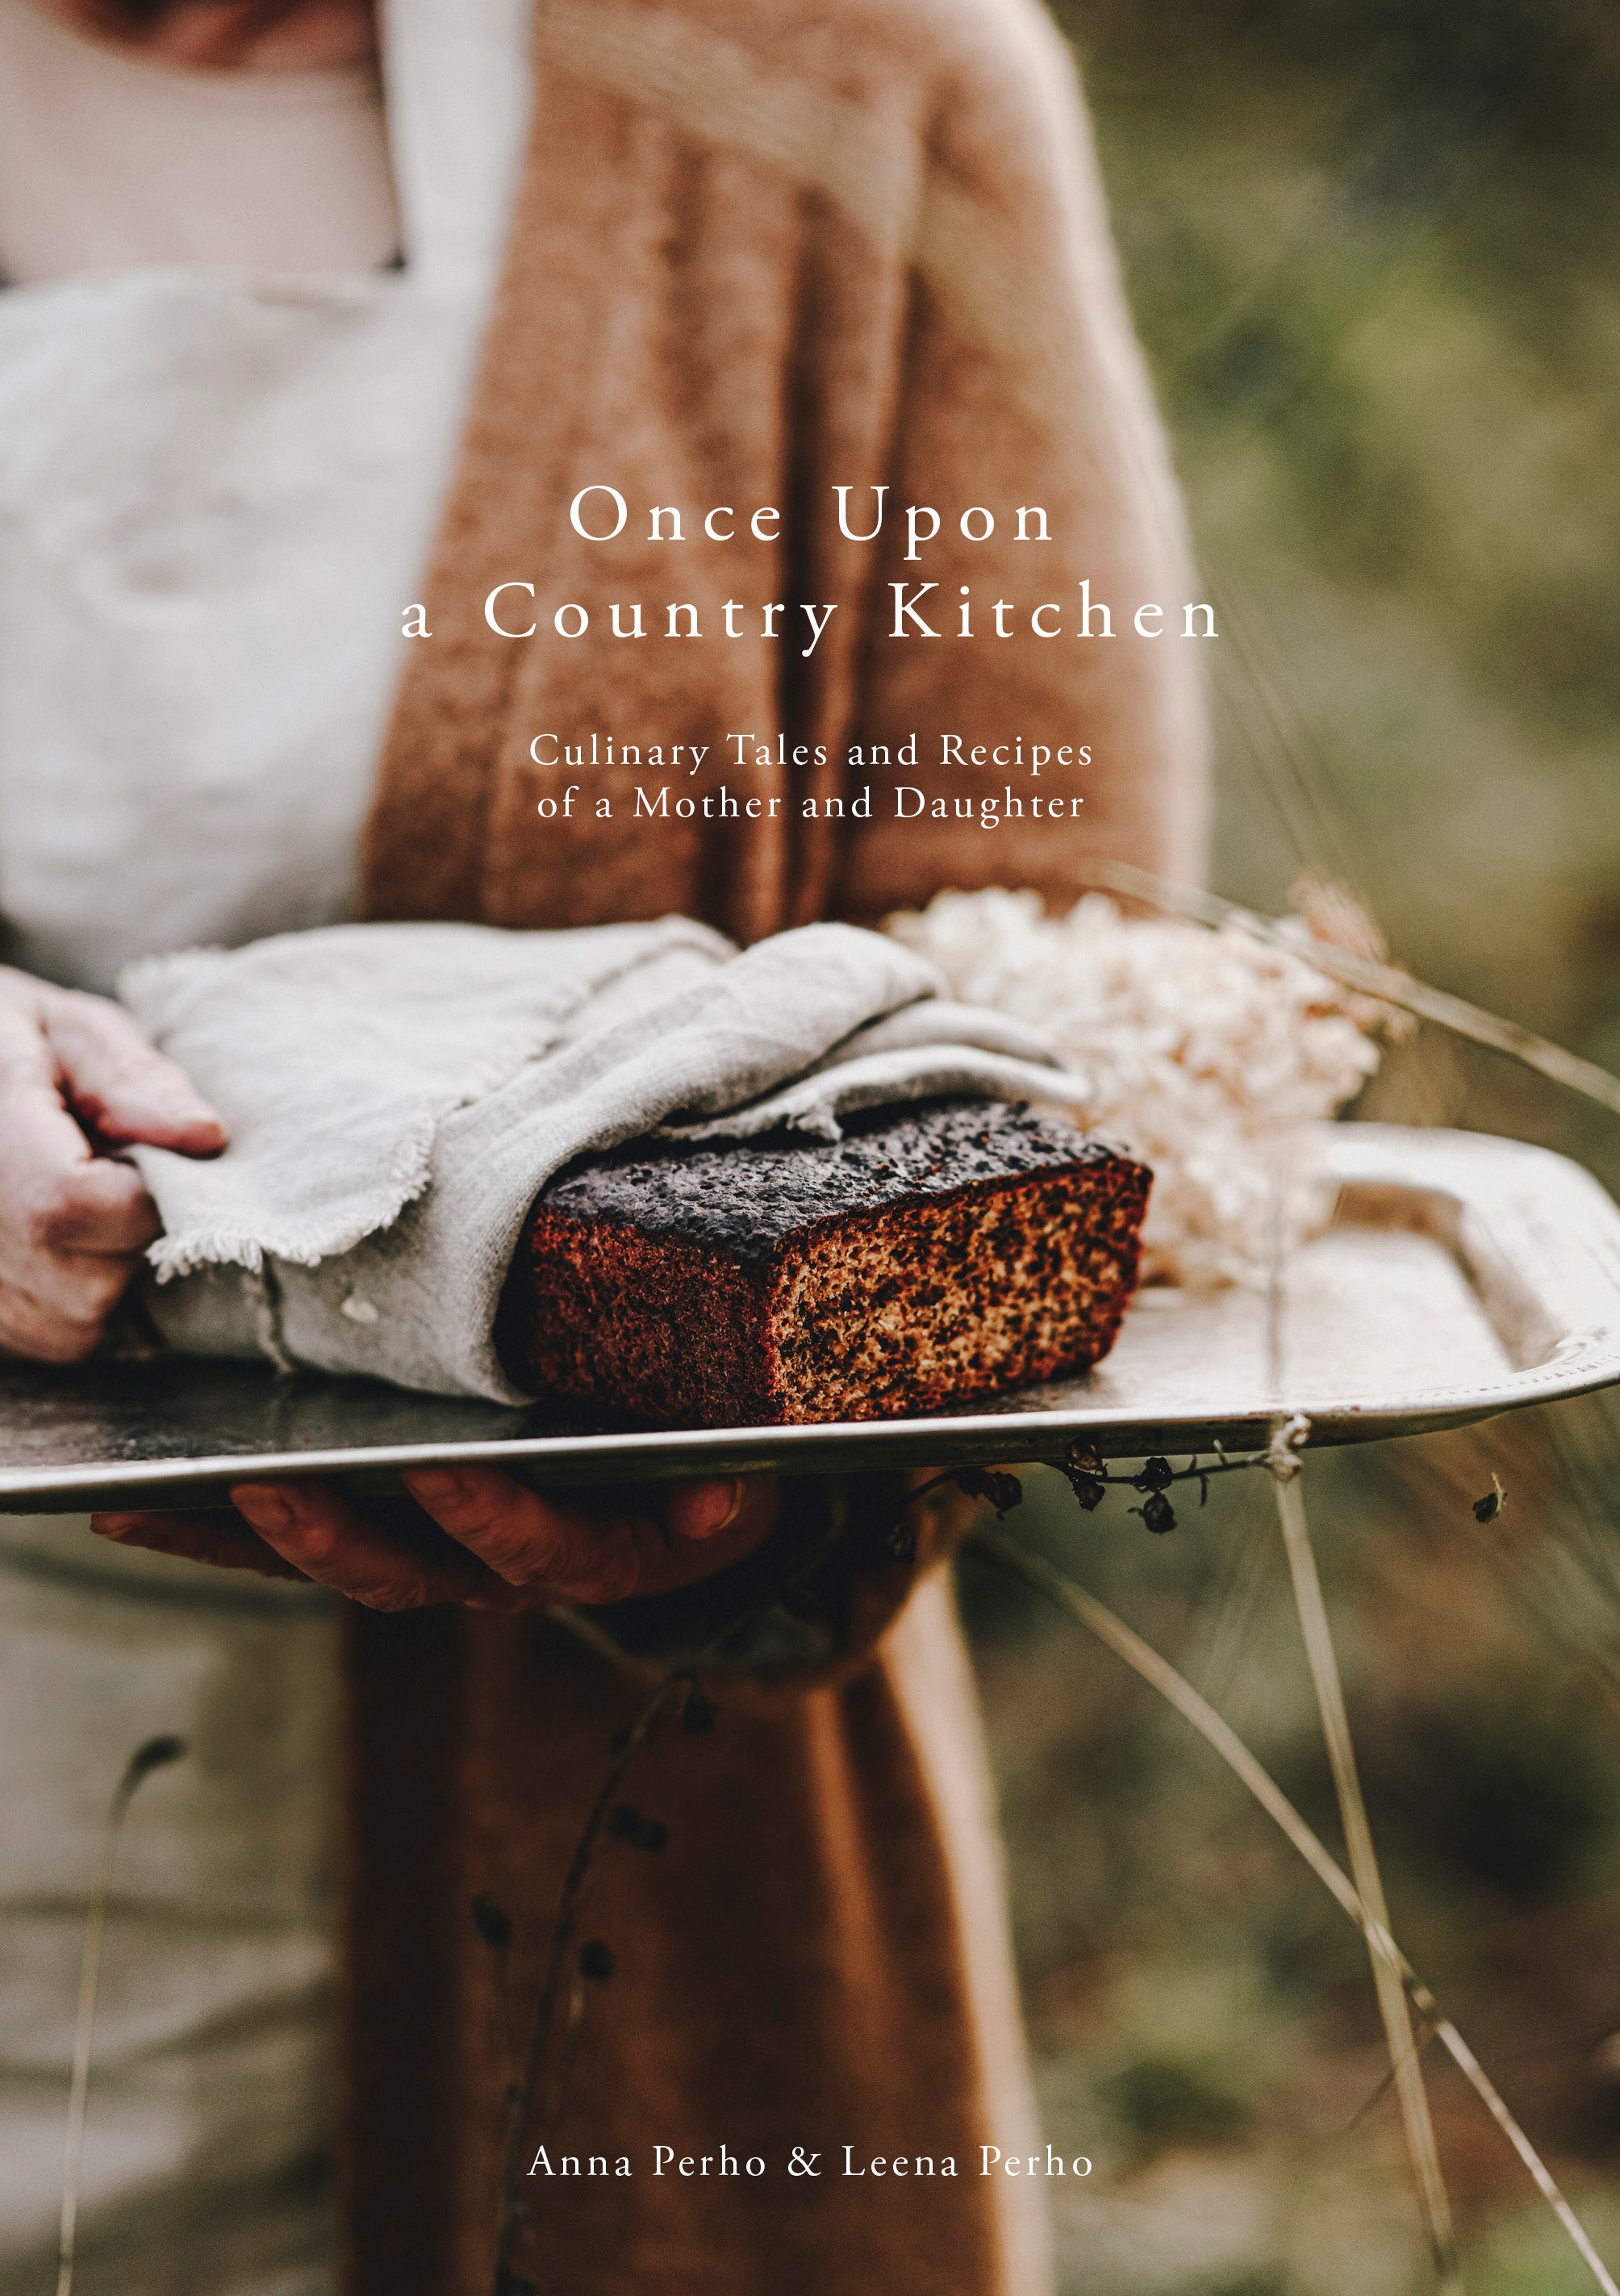 Once Upon a Country Kitchen